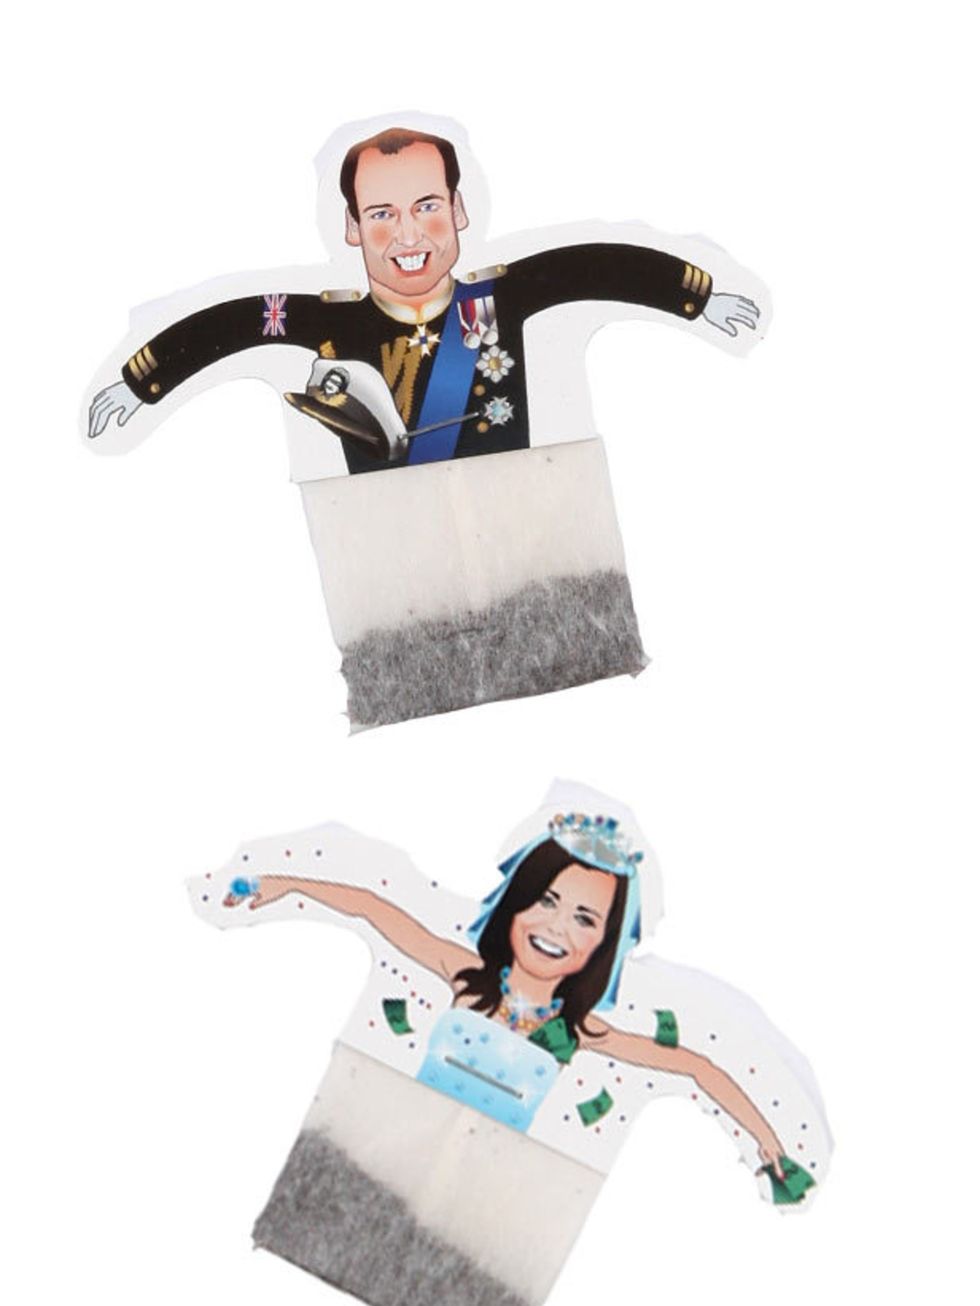 <p>Novelty <a href="http://www.elleuk.com/starstyle/style-files/(section)/kate-middleton">Kate</a> and William Royal Wedding Teabags, £4.95, at <a href="http://www.liberty.co.uk/fcp/product/Liberty/The-Royal-Wedding/Novelty-Kate-and-William-Royal-Wedding-